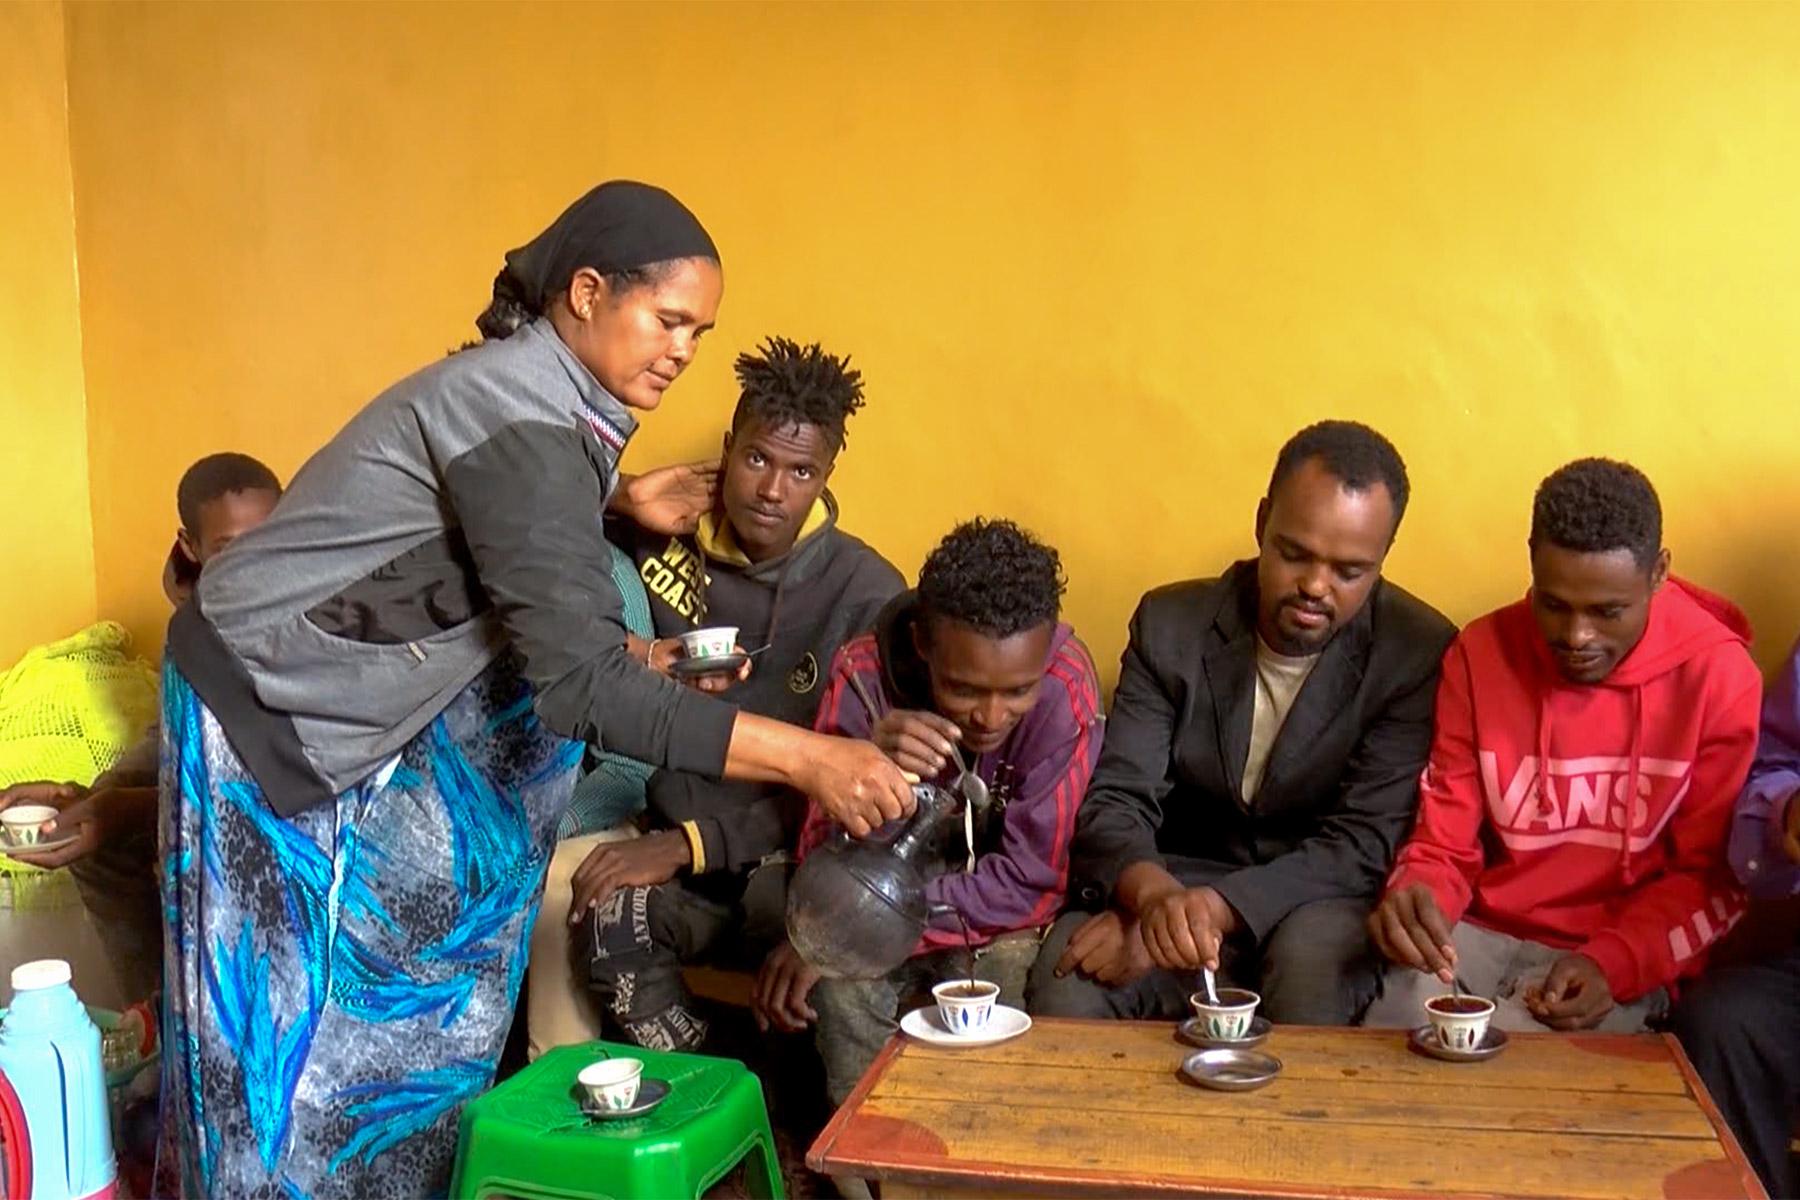 The LWF-supported Symbols of Hope project coordinated by the Ethiopian Evangelical Church Mekane Yesus supports returnee migrants. Ms Fatuma Mollago says she came back from South Sudan âwith nothingâ but now runs her own coffee shop, and can take care of her family. Photo: DASSC/EECMY